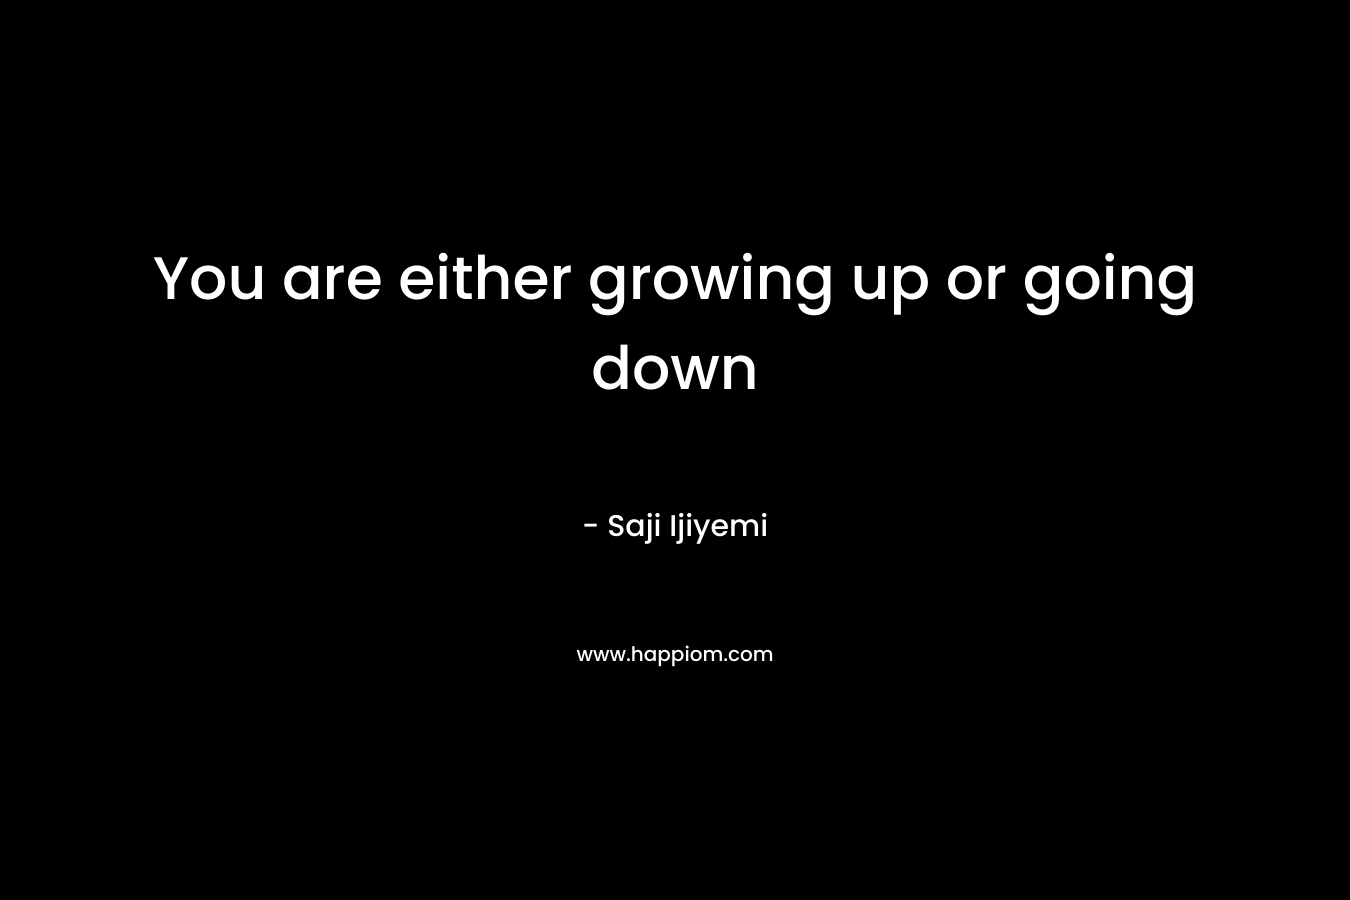 You are either growing up or going down